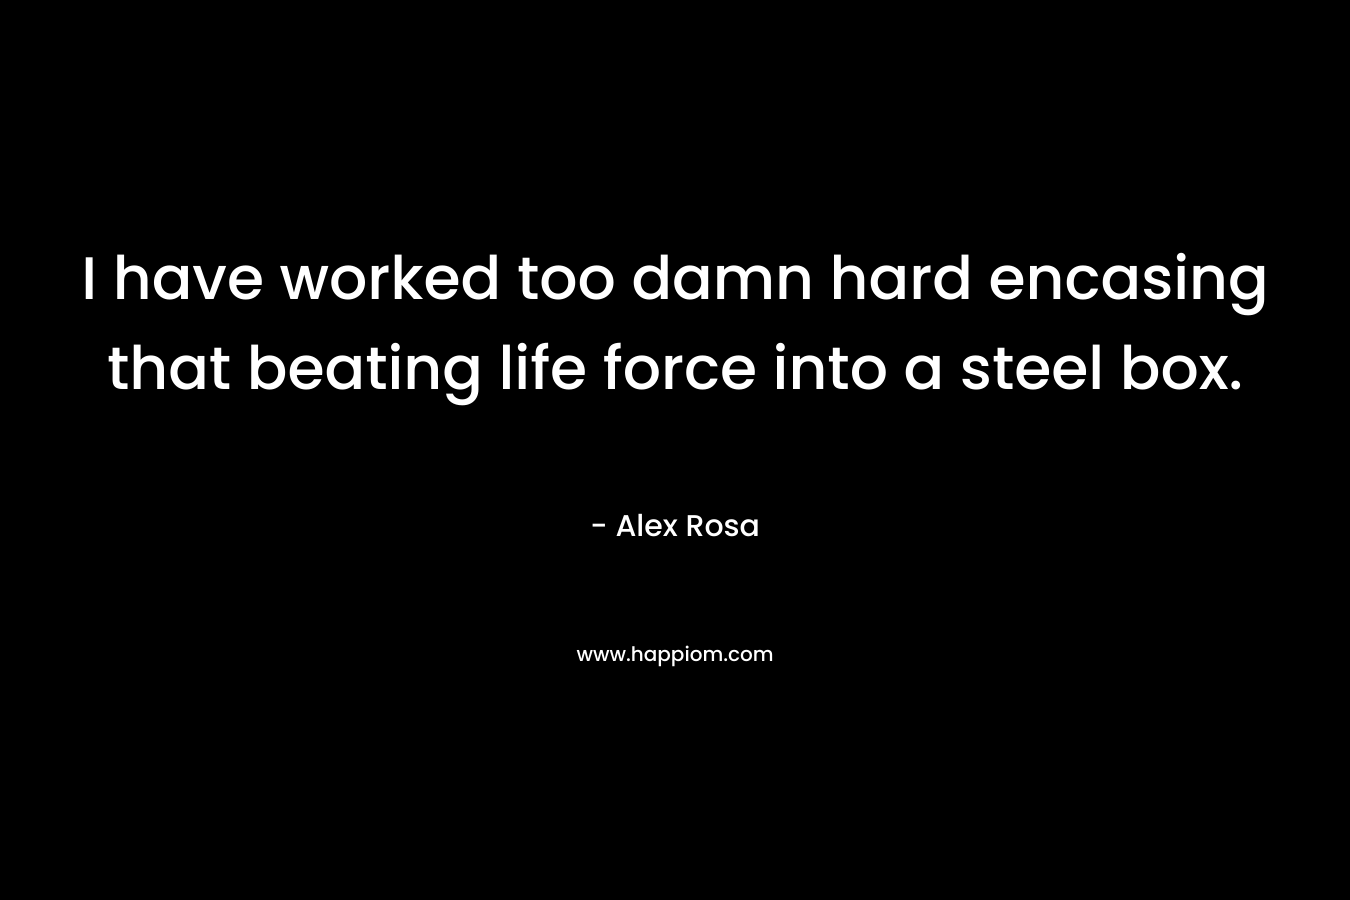 I have worked too damn hard encasing that beating life force into a steel box. – Alex Rosa